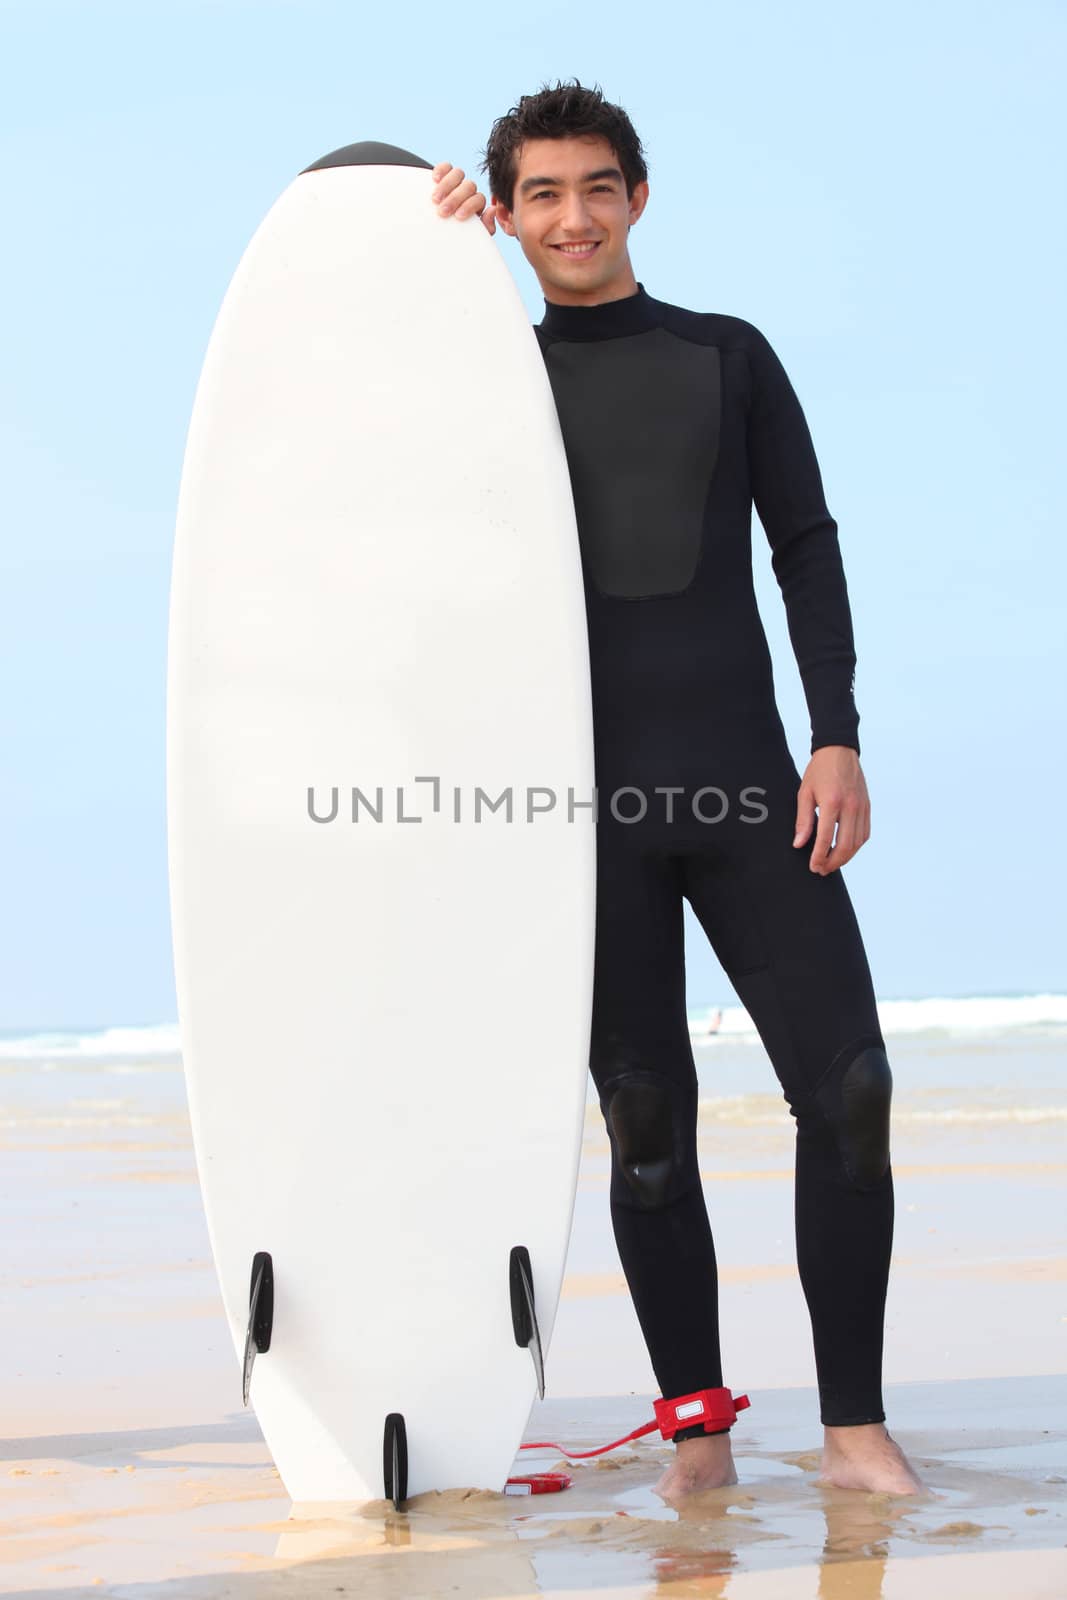 young surfer posing with board